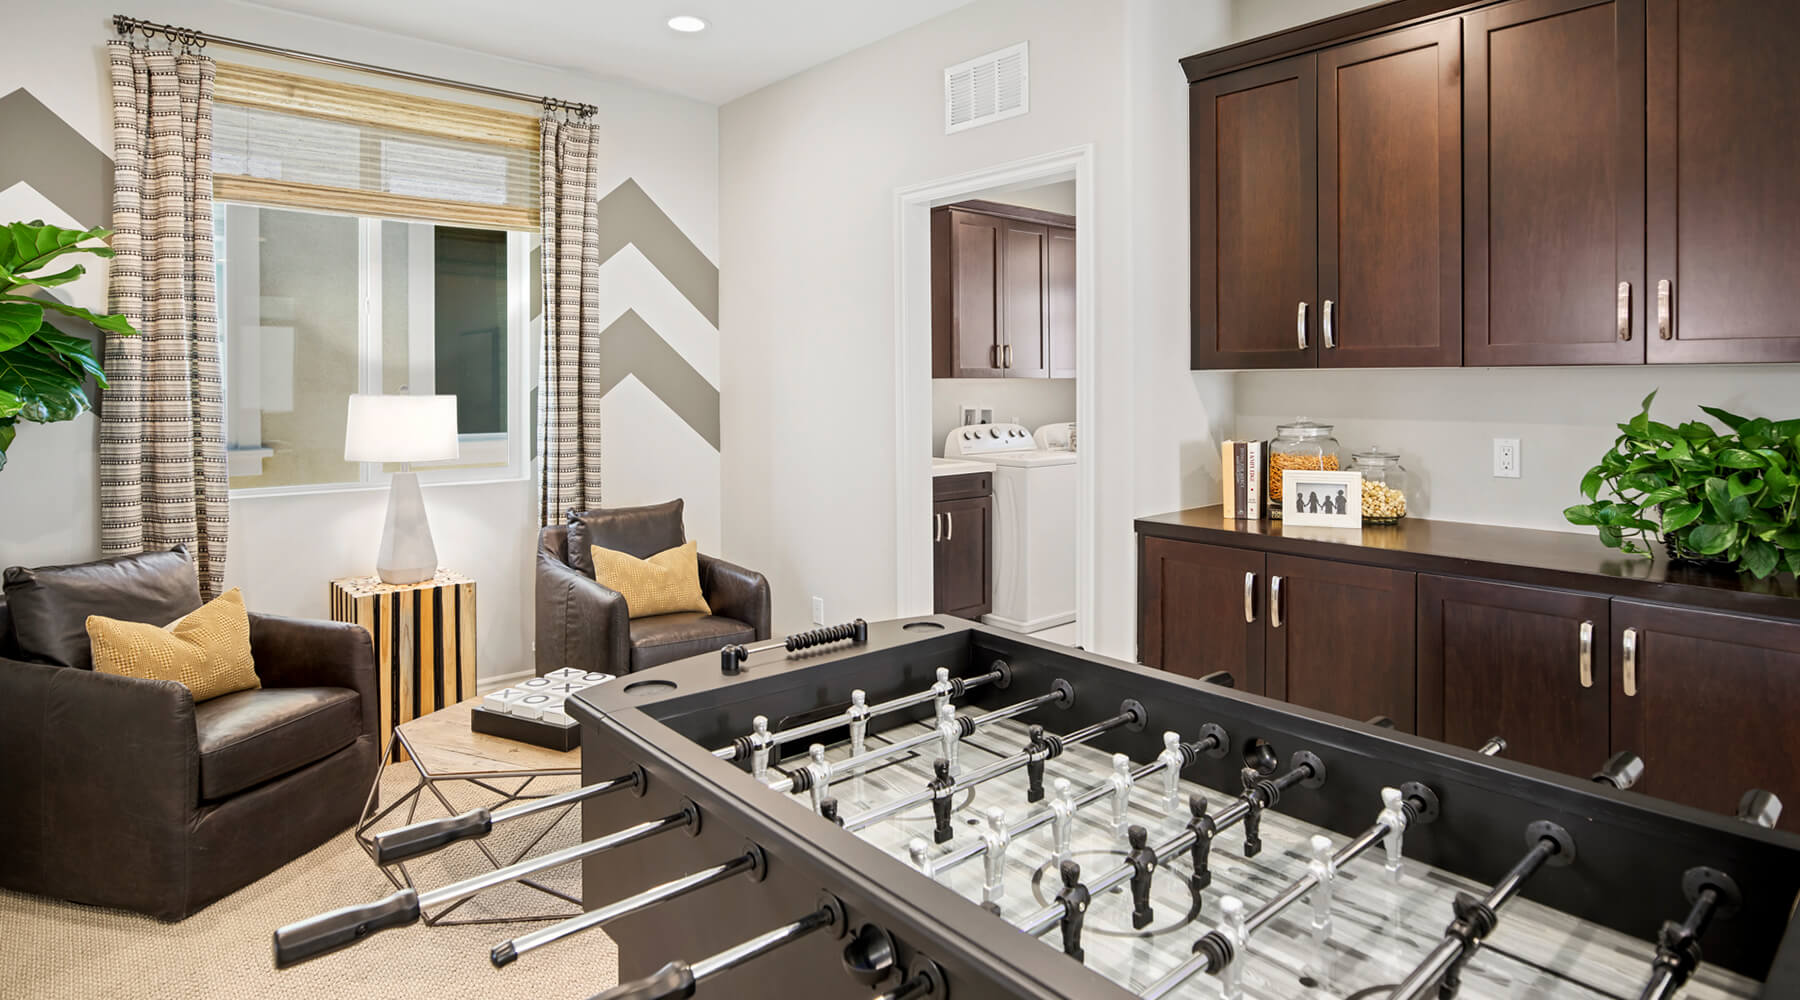 Game room at Amarante new townhomes for sale